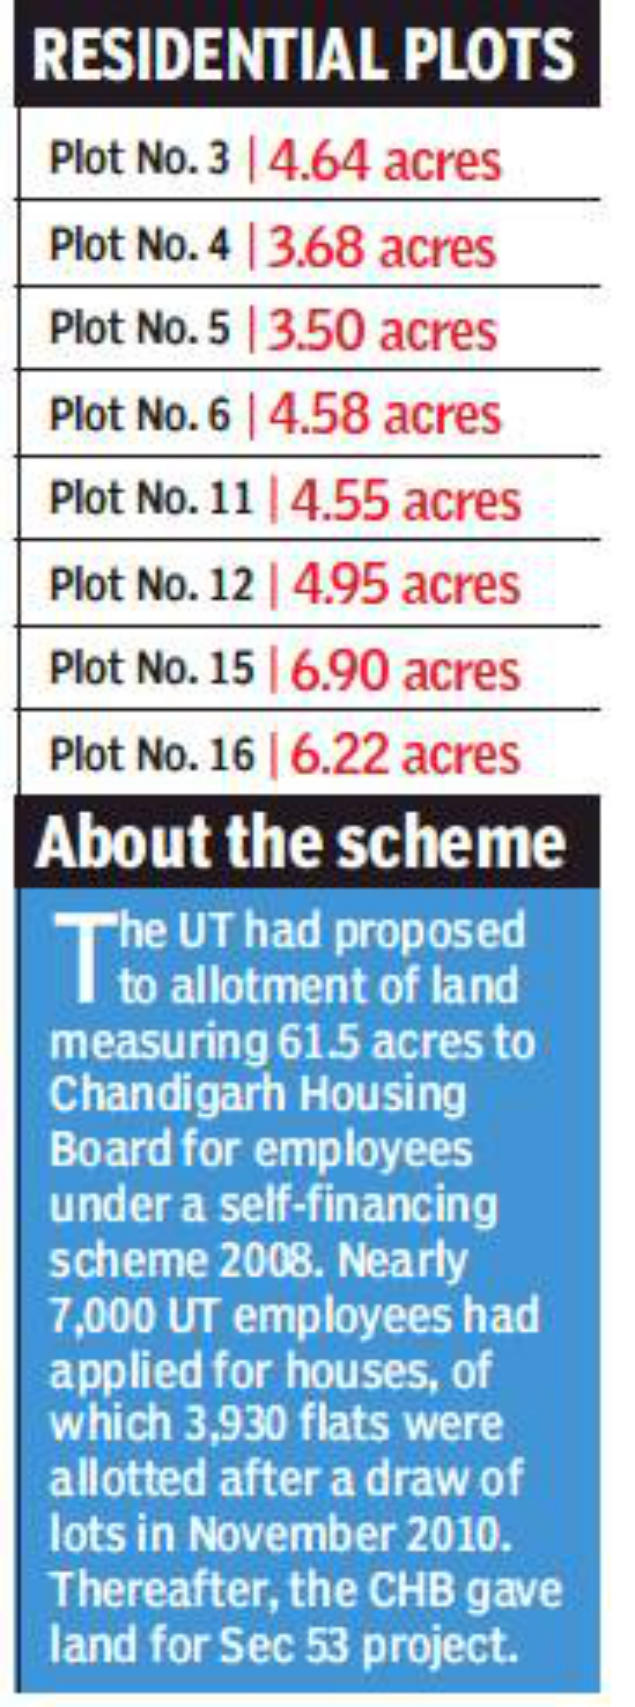 Chandigarh housing board plans to give land for residential projects to Punjab, Haryana